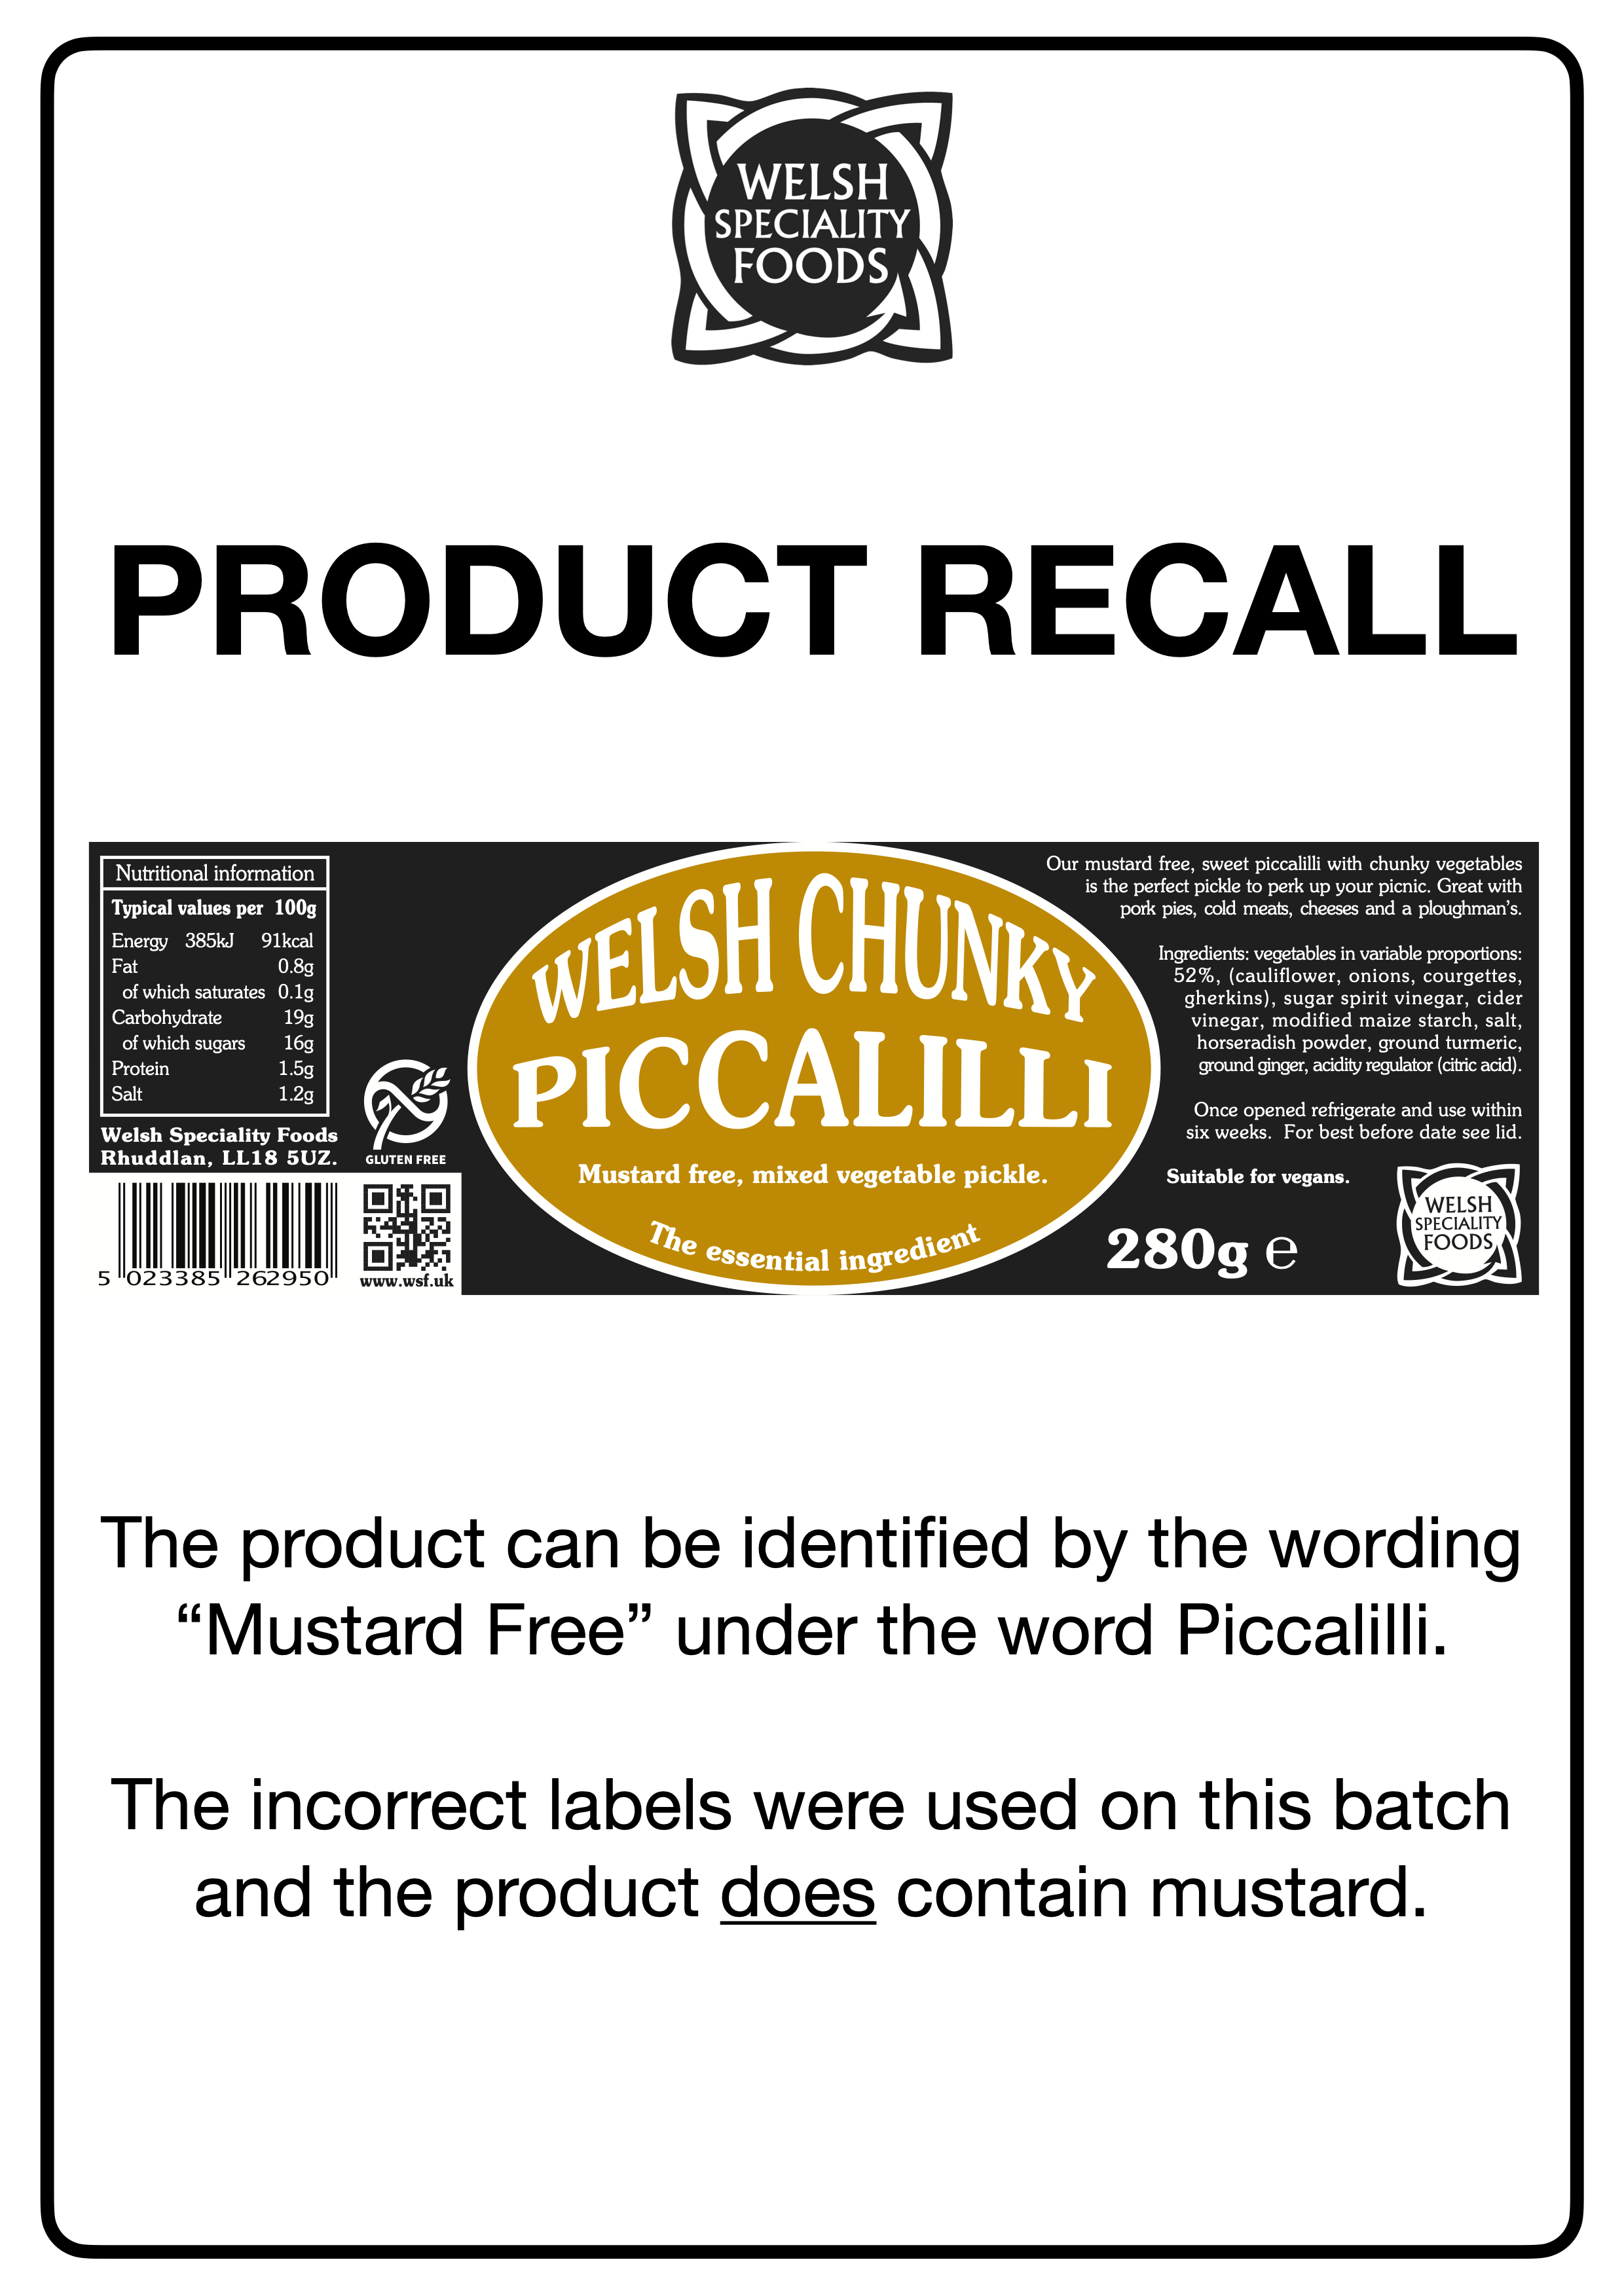 Welsh Speciality Foods recall poster